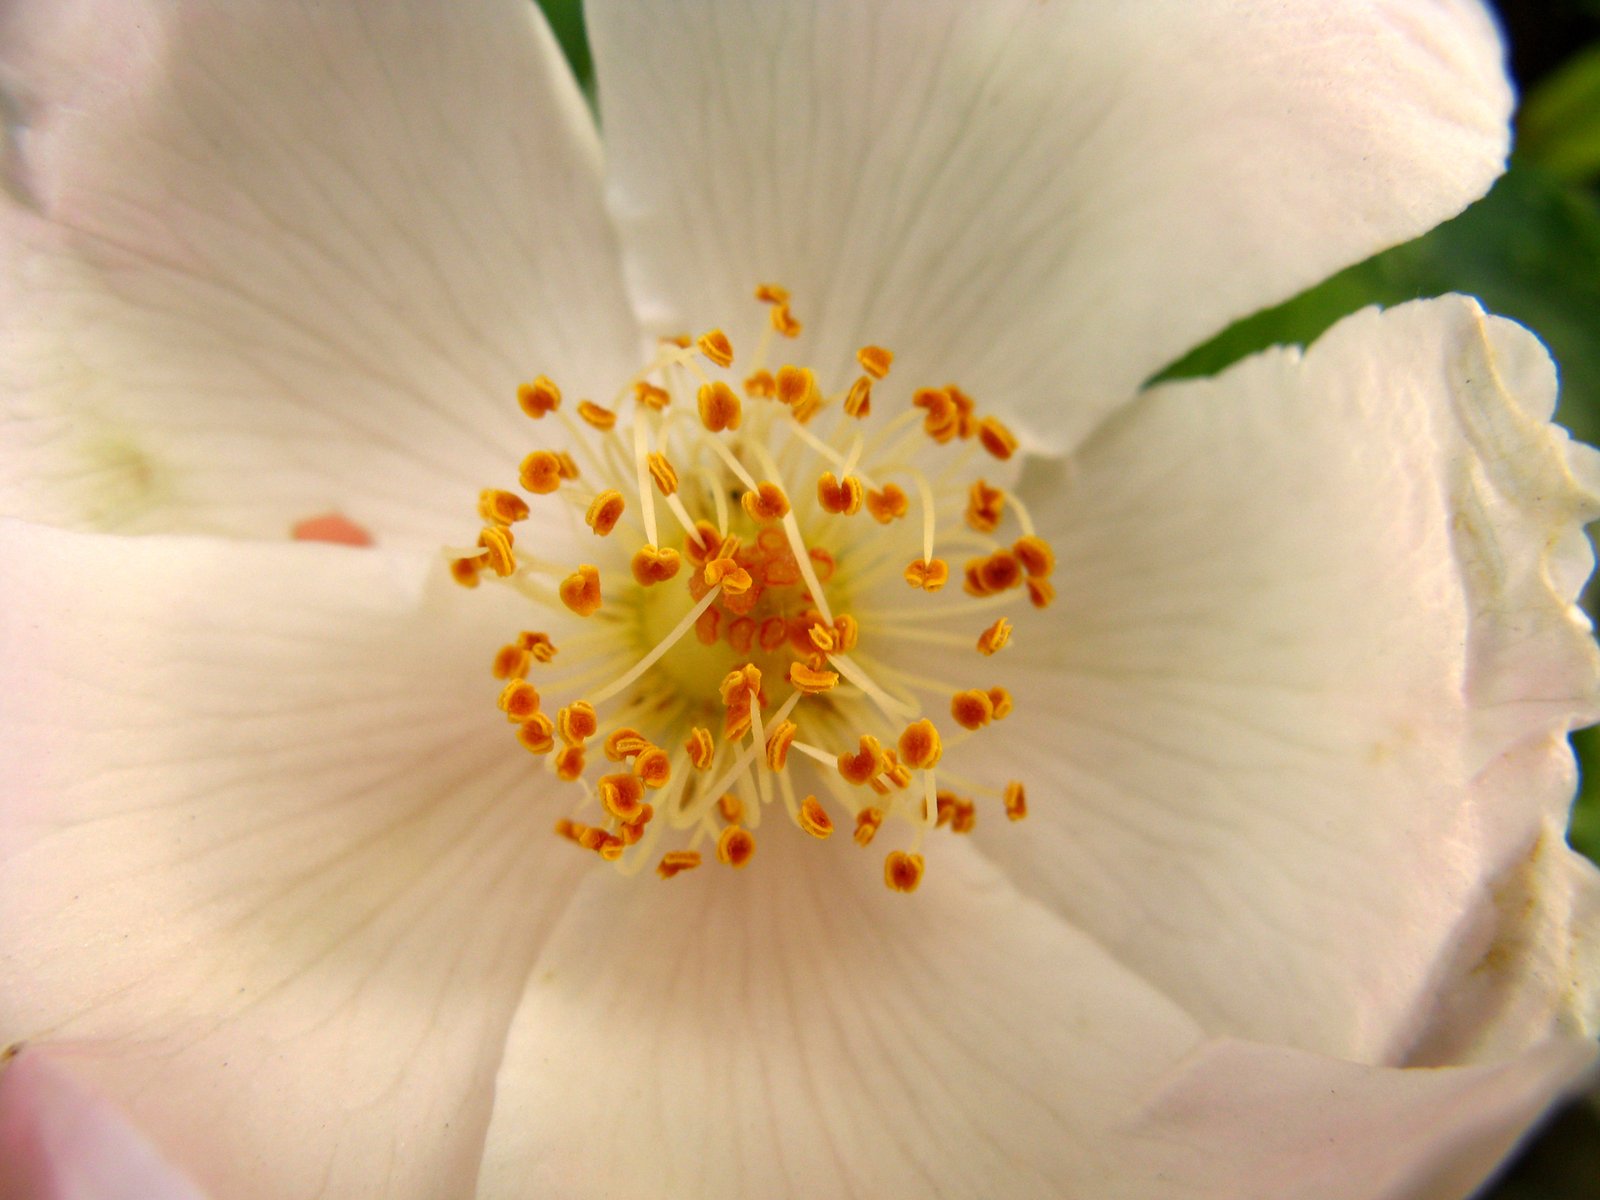 the inside of a white flower with lots of yellow center